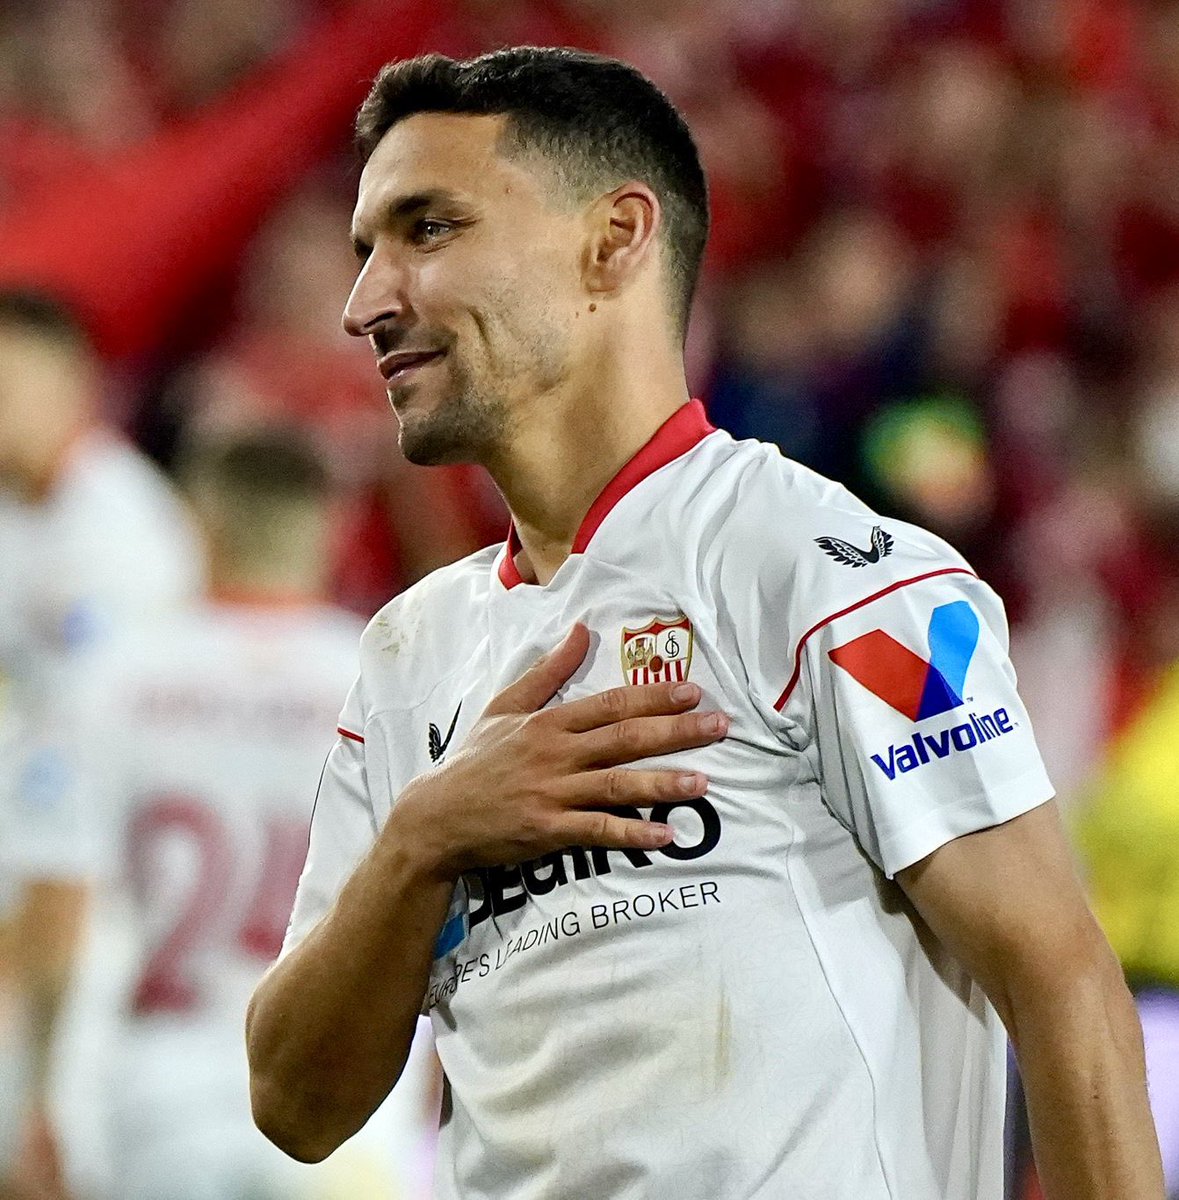 🤍❤️ Happy ending for Jesús Navas story as he announced he was leaving Sevilla after not being offered new deal…

He’s now signed a lifetime contract with the club after speaking to the president!

He will stay until December and after he can work in any job role for Sevilla.